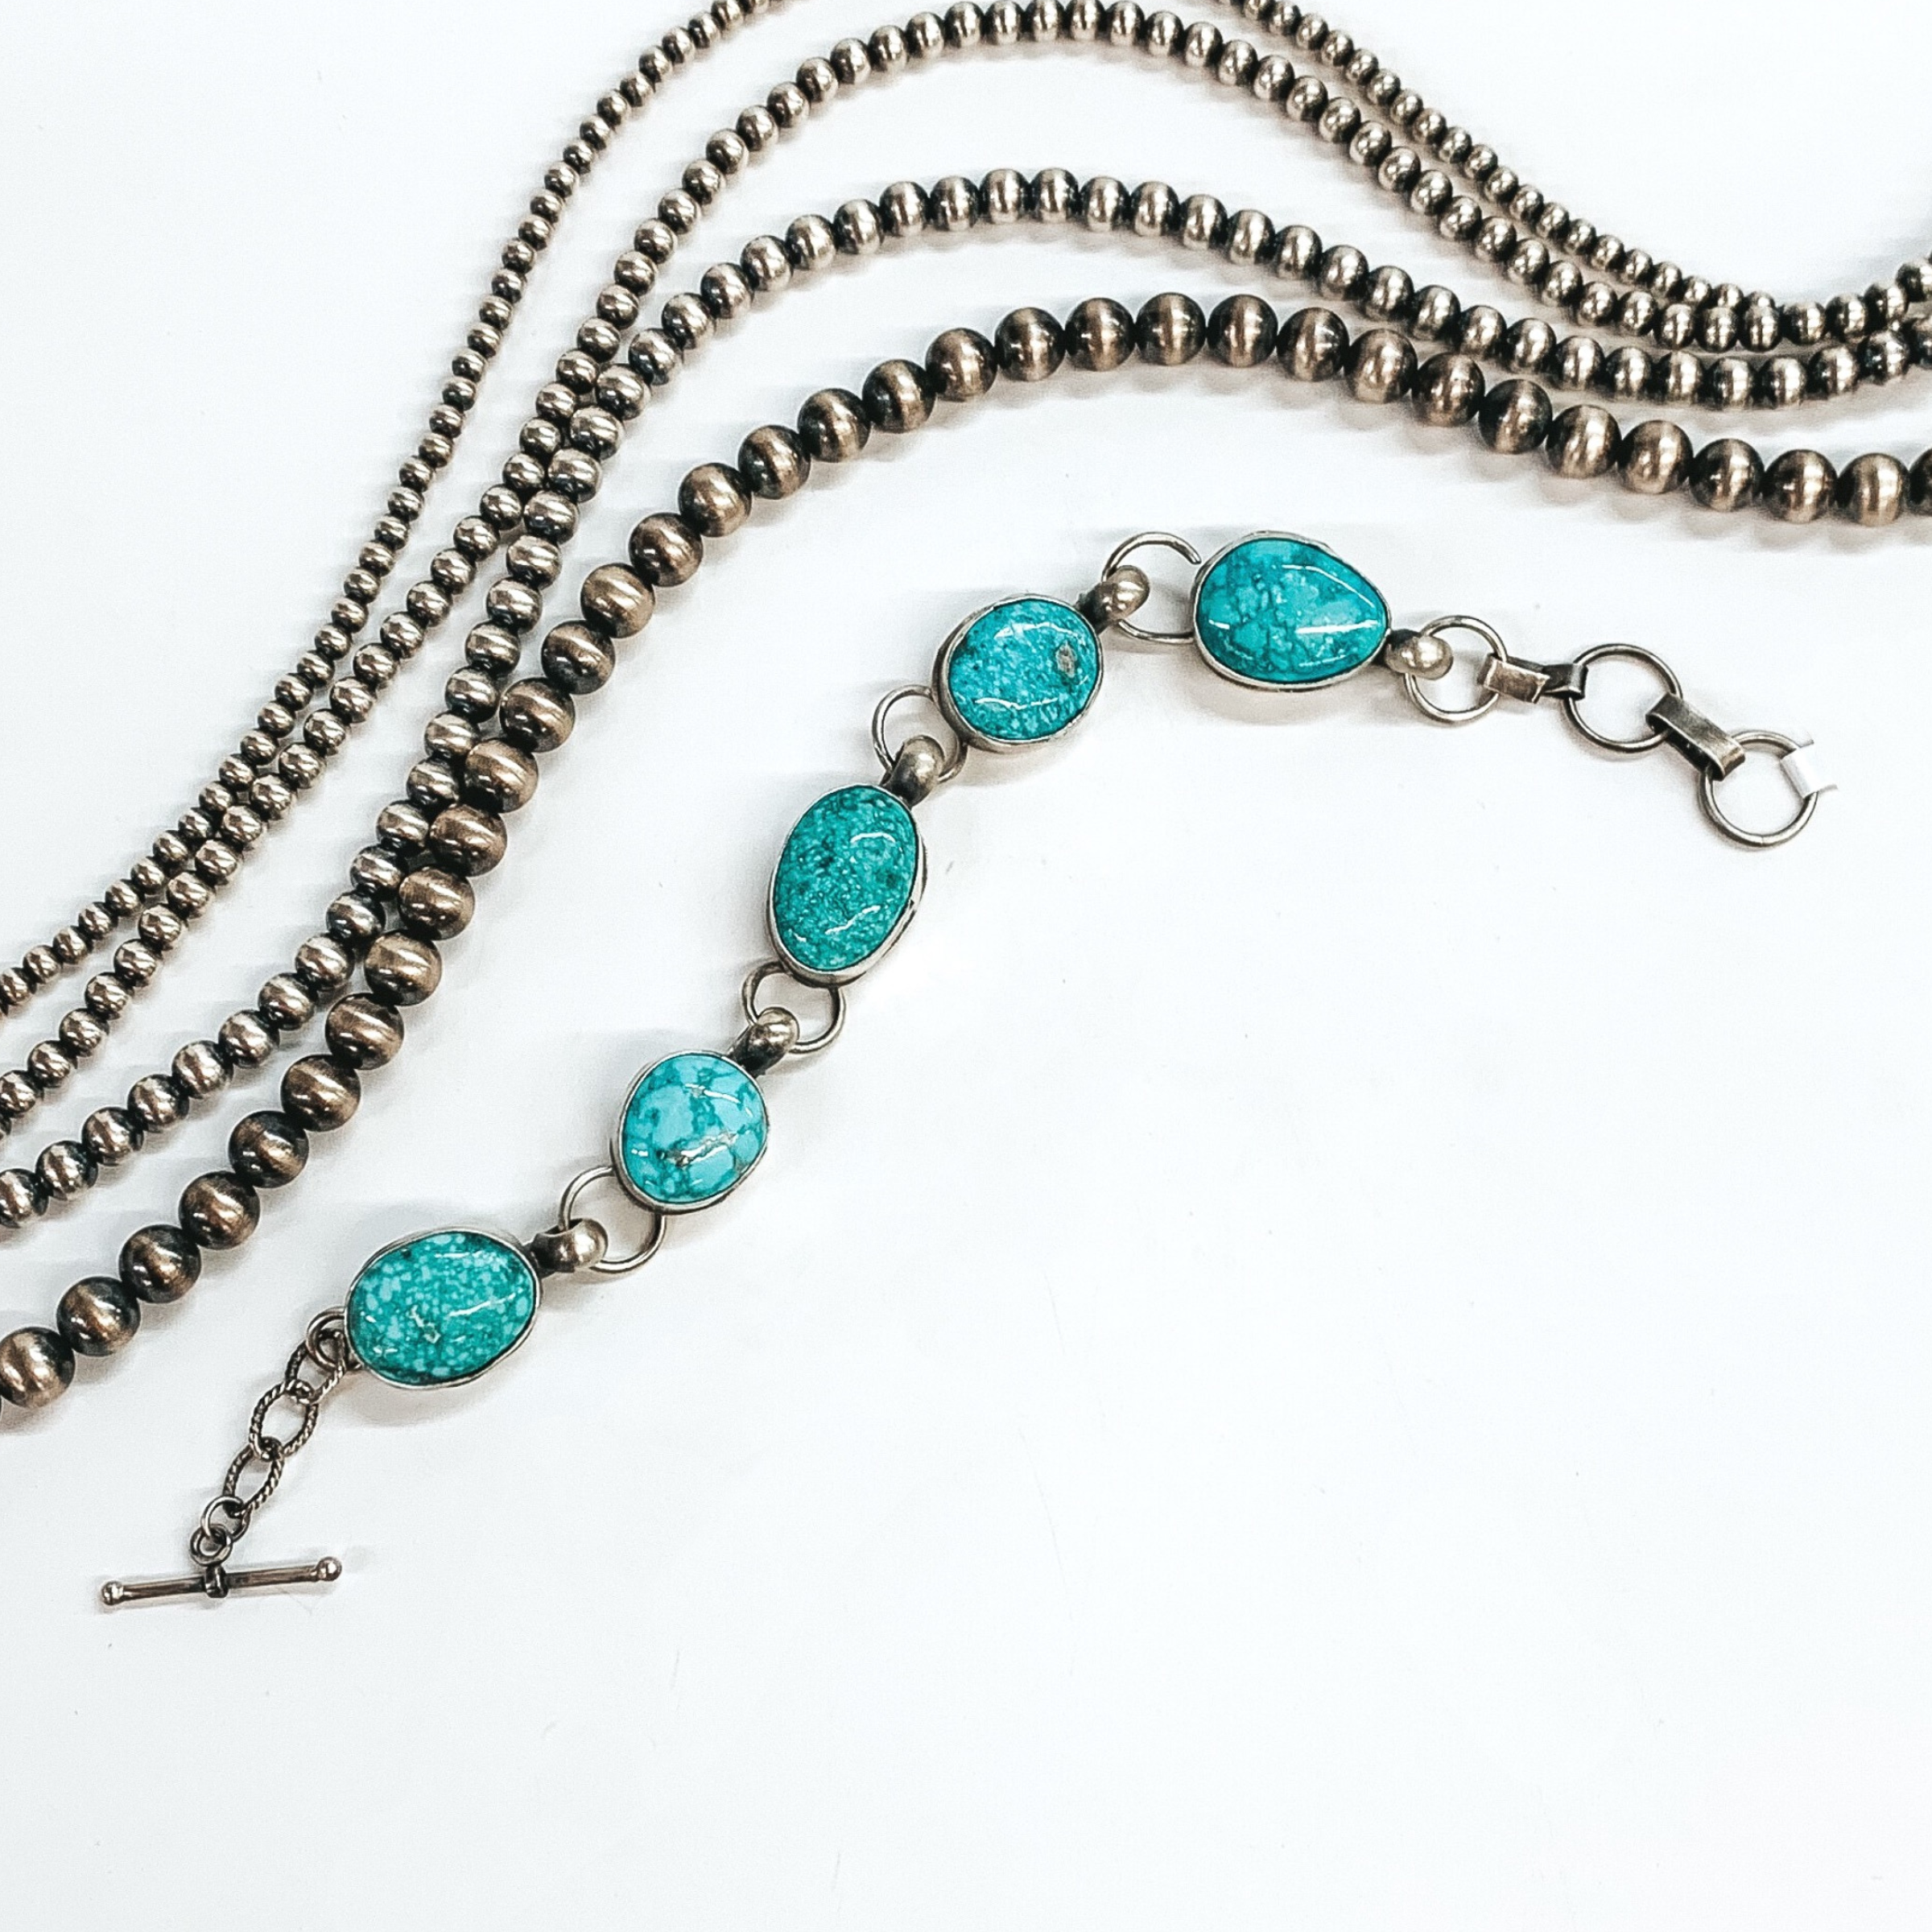 Boyd Ashley | Navajo Handmade Sterling Silver Chain Link Bracelet with White Water Turquoise Stones - Giddy Up Glamour Boutique